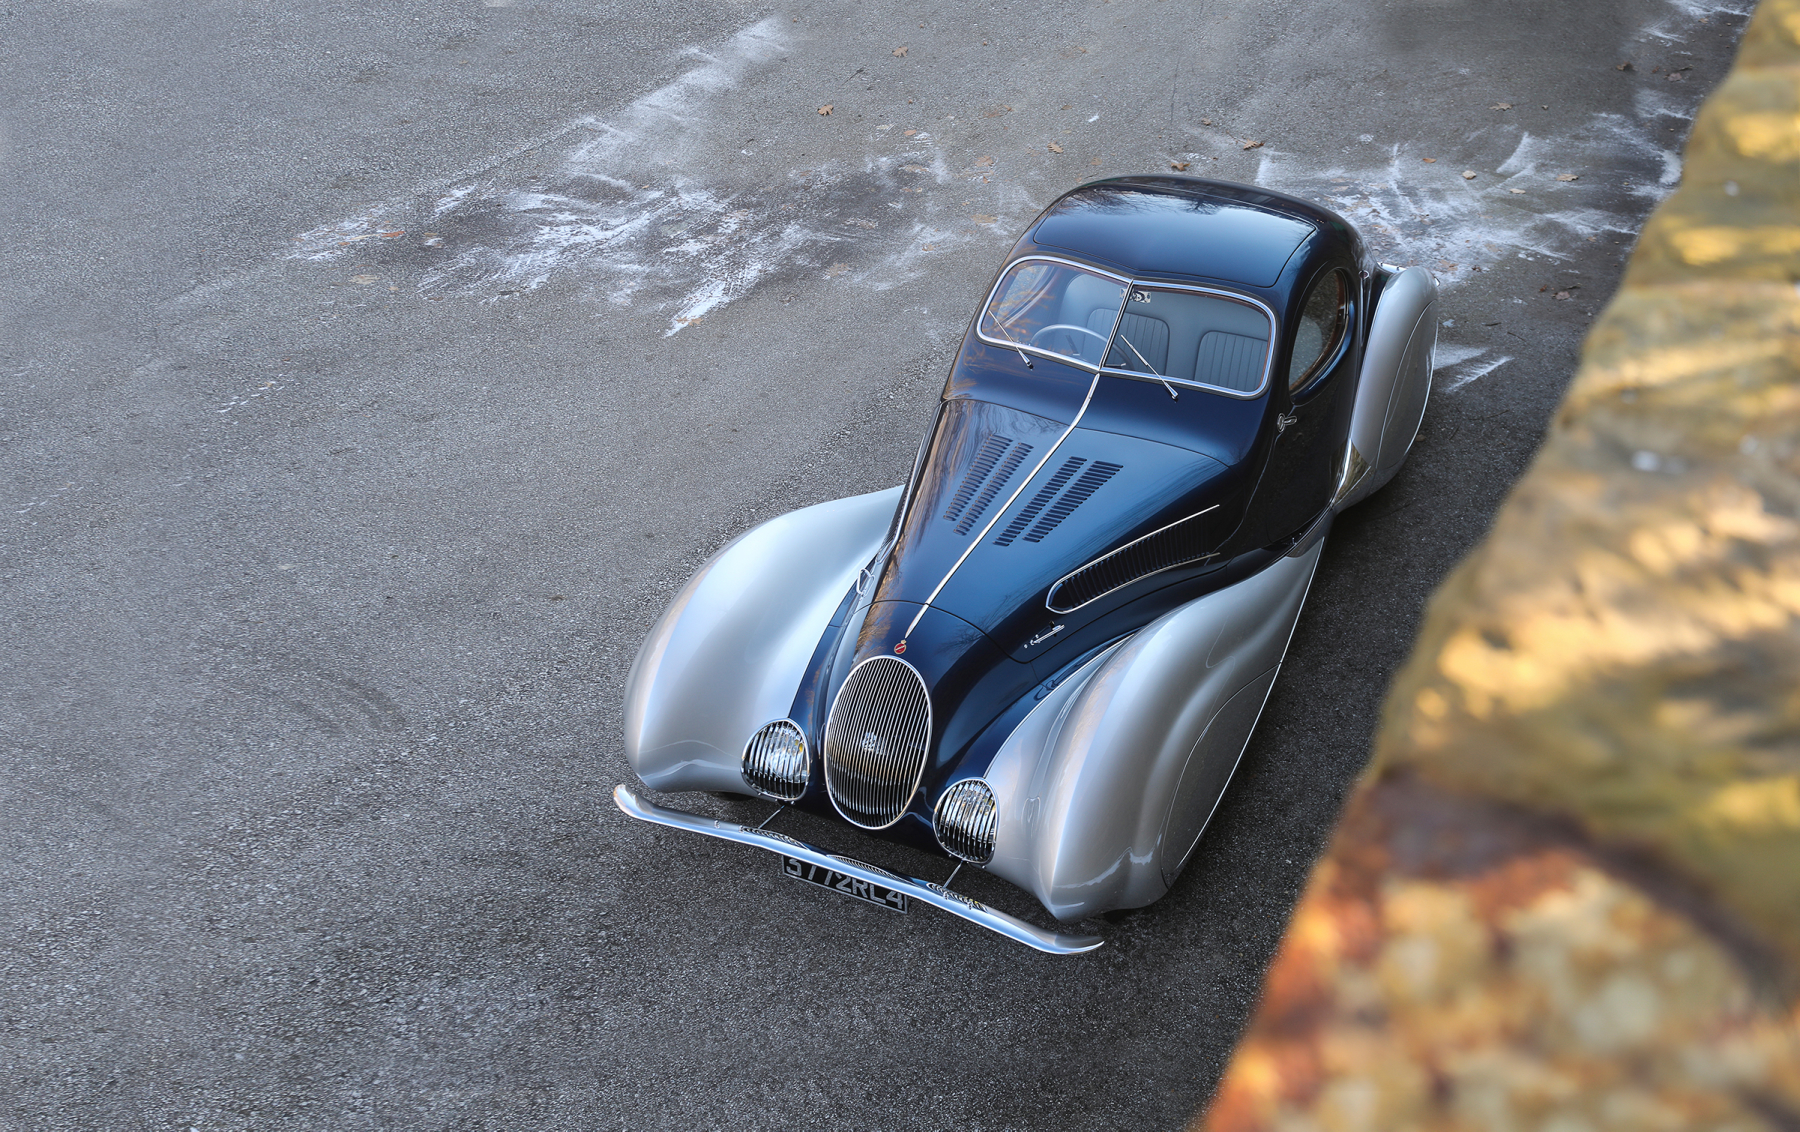 The 1938 Talbot-Lago T150-C-SS Teardrop Coupe from the 2022 Amelia Island Auction